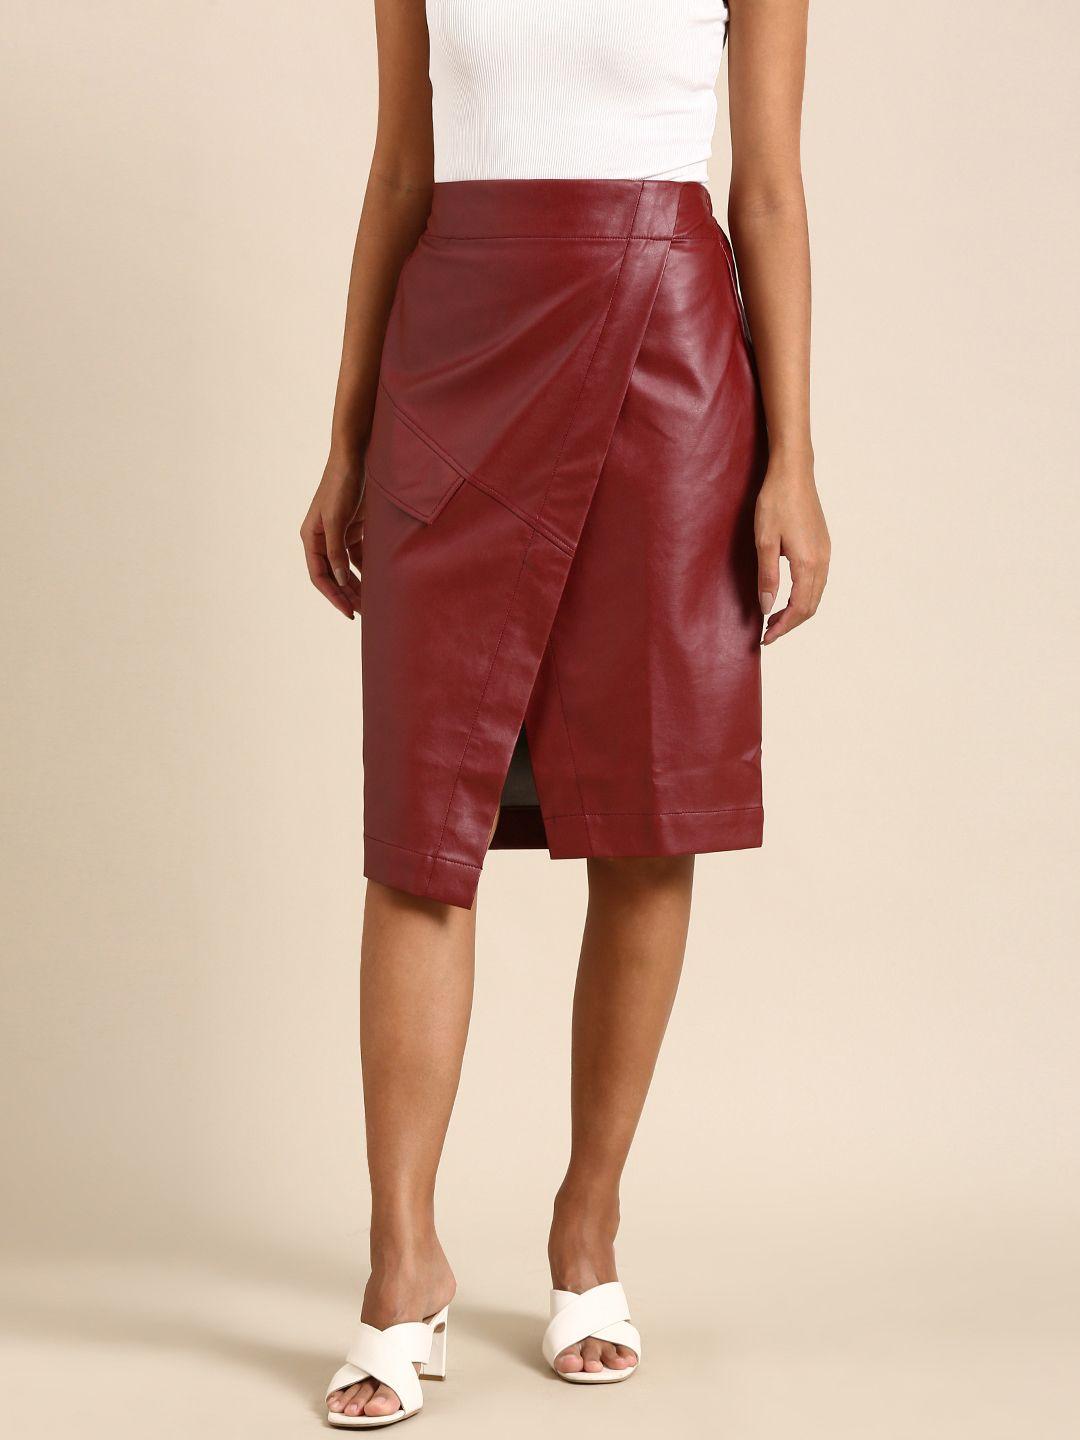 athena women maroon wrap skirt with front slit